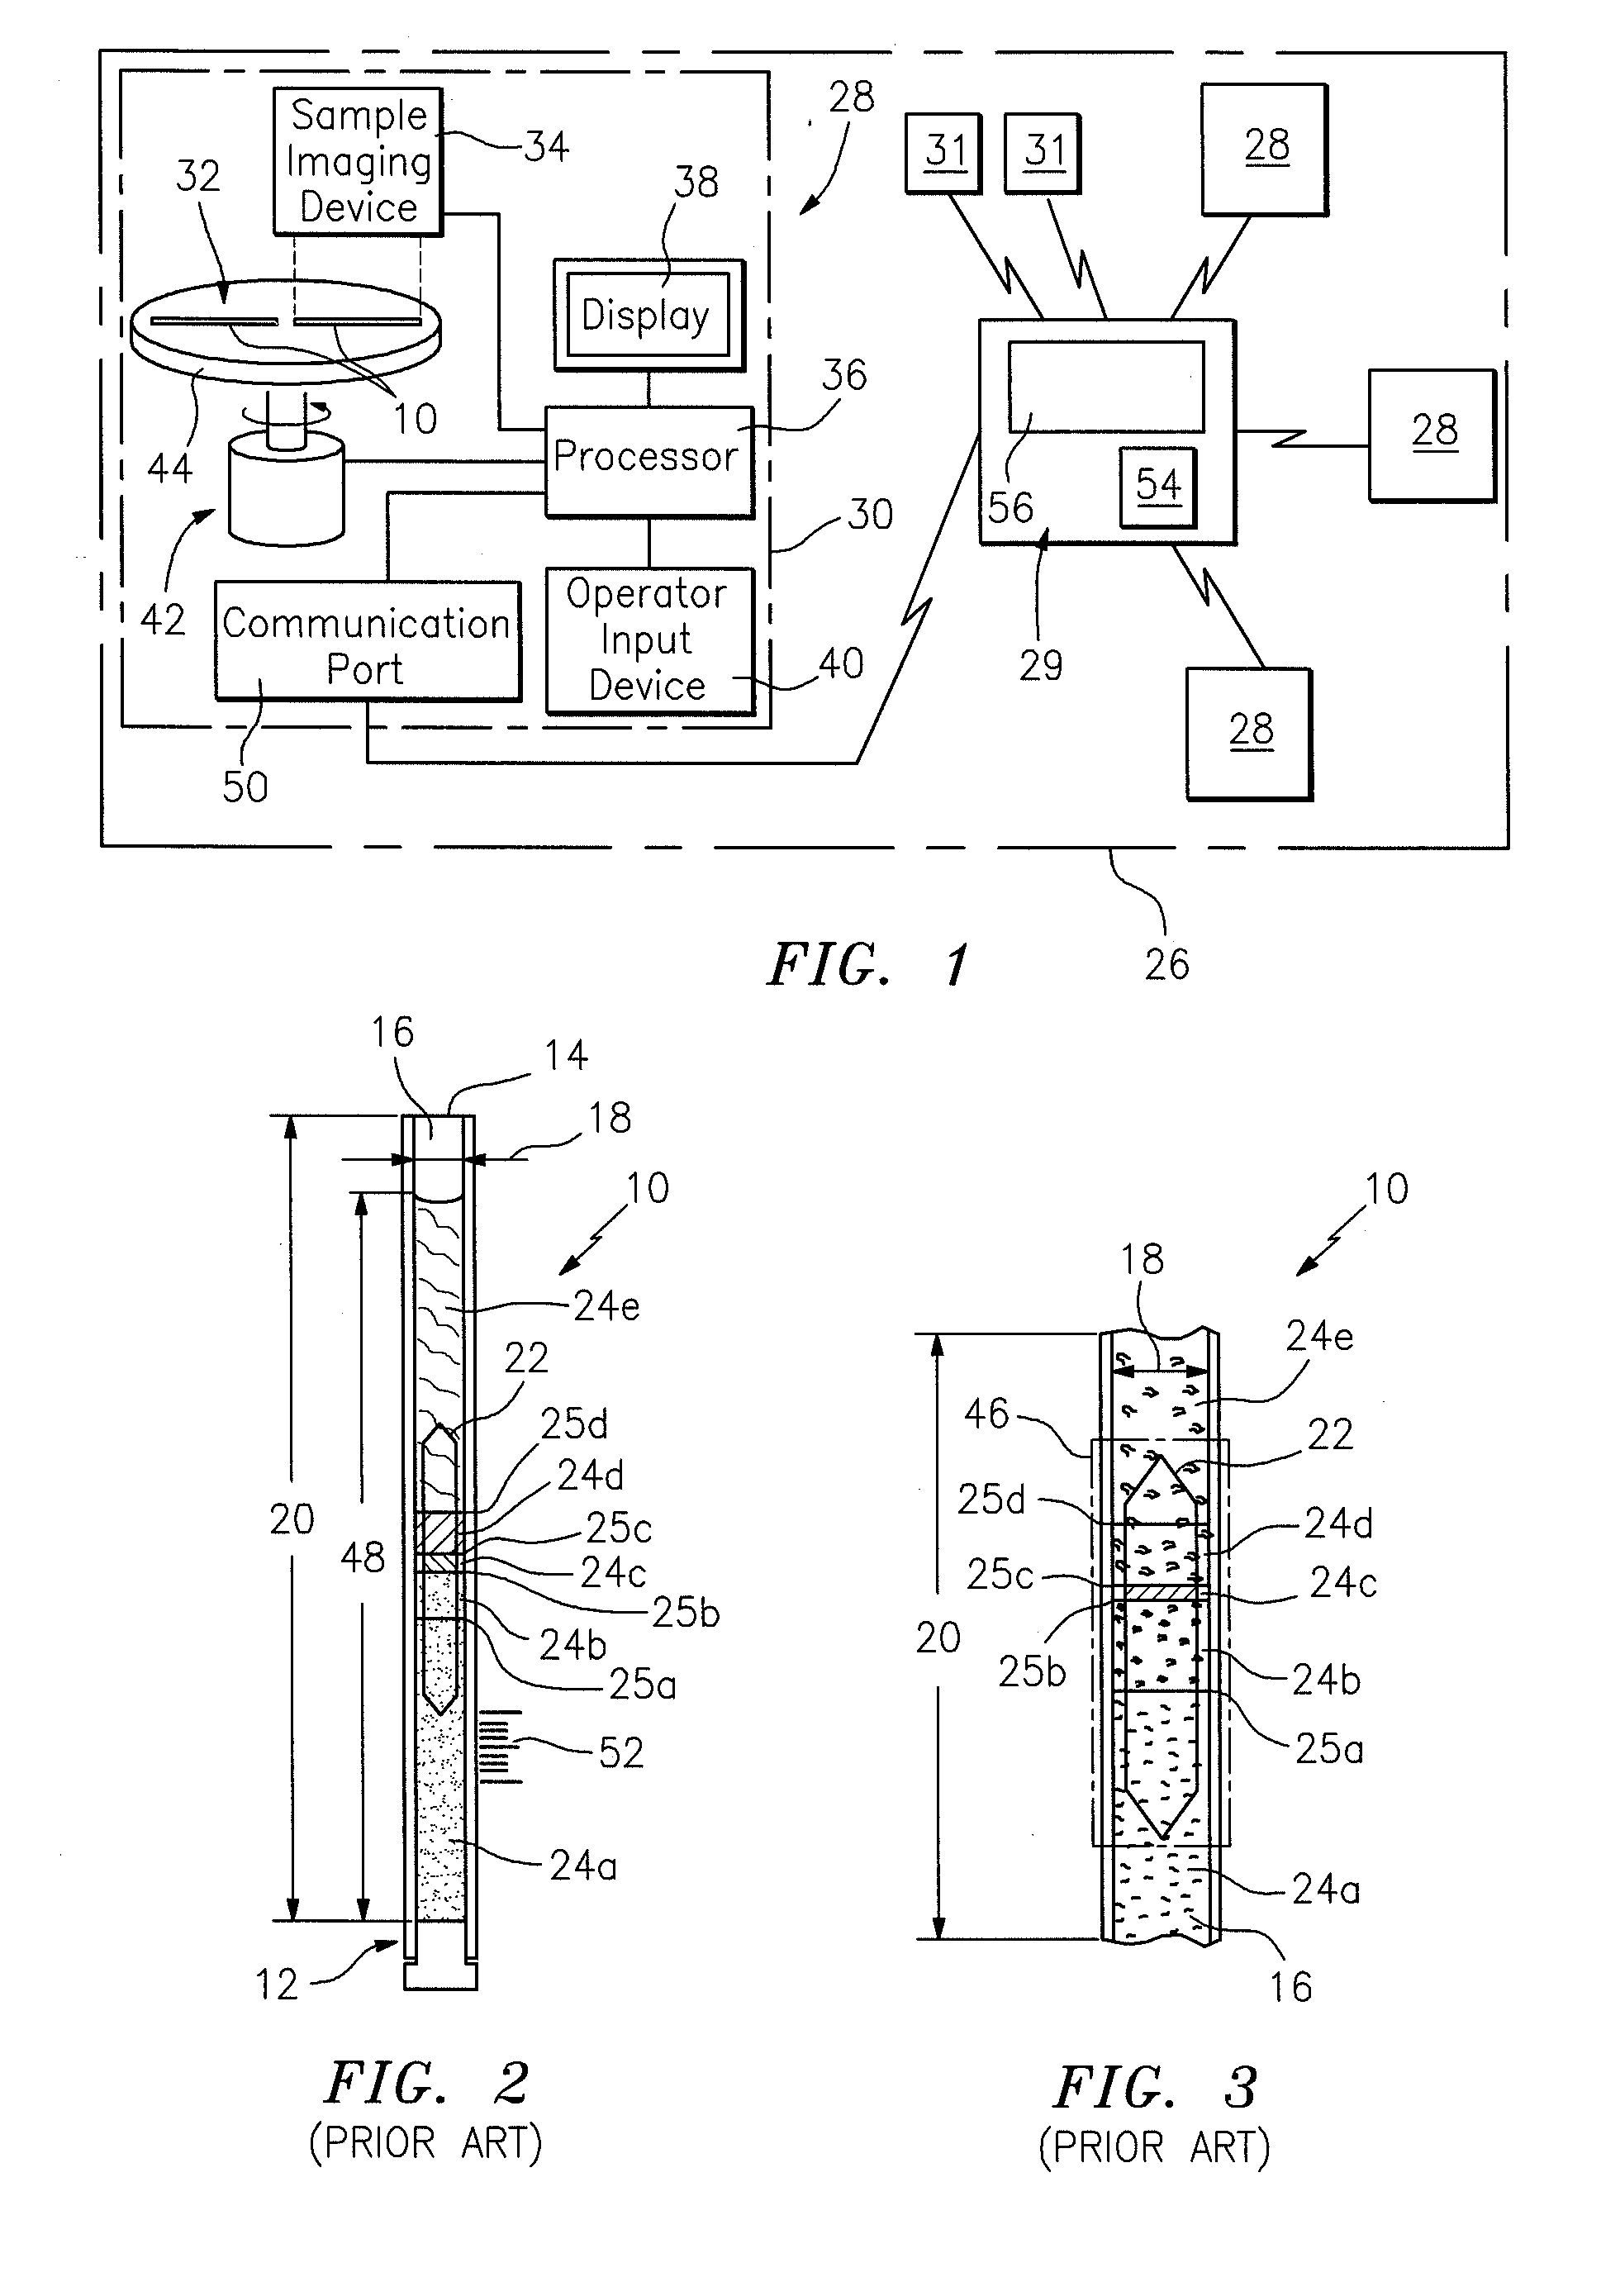 Method and apparatus for remotely performing hematologic analysis utilizing a transmitted image of a centrifuged analysis tube